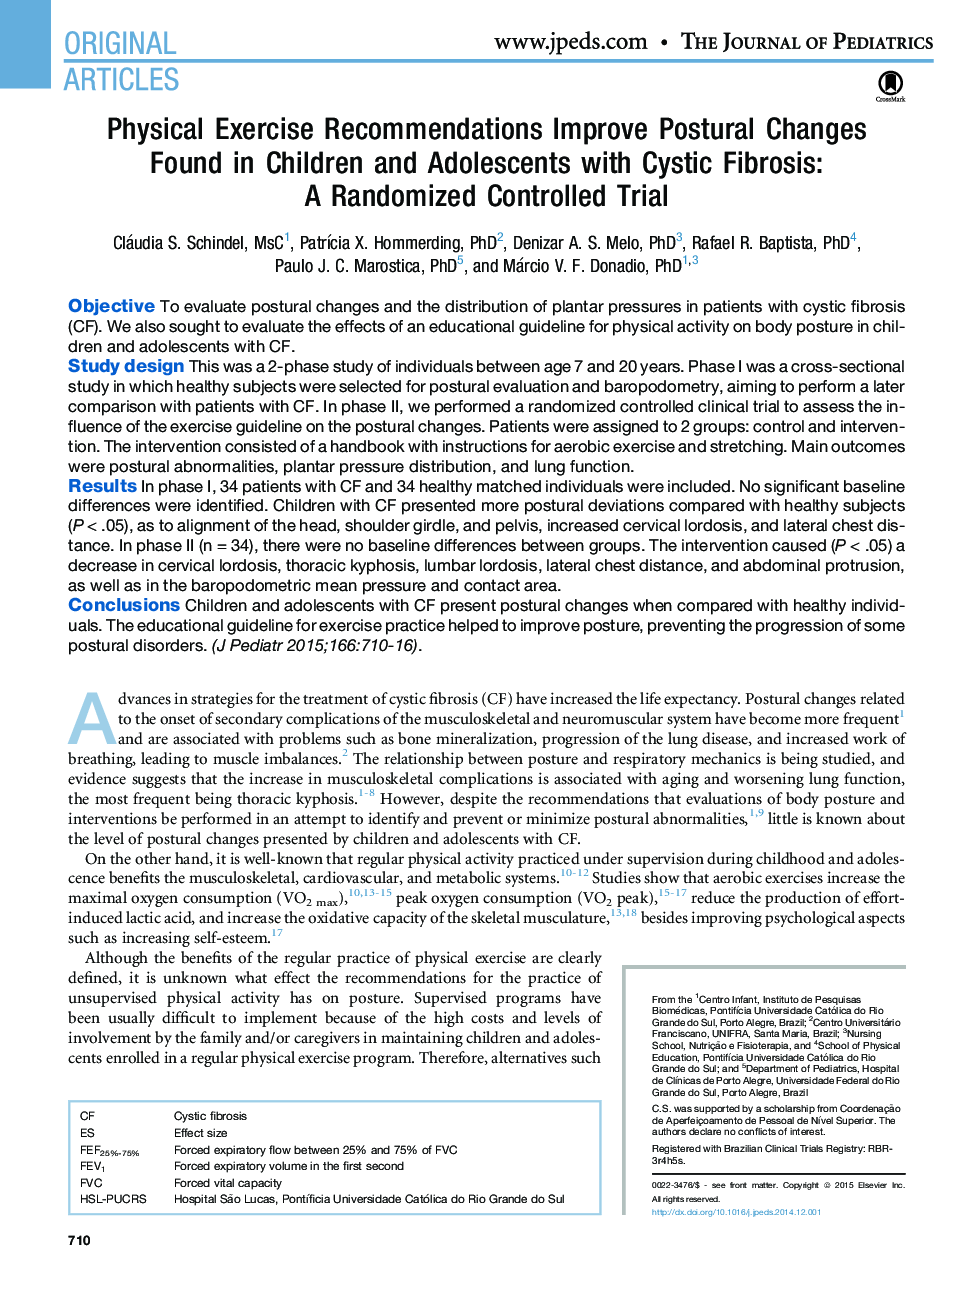 Physical Exercise Recommendations Improve Postural Changes FoundÂ in Children and Adolescents with Cystic Fibrosis: AÂ RandomizedÂ Controlled Trial